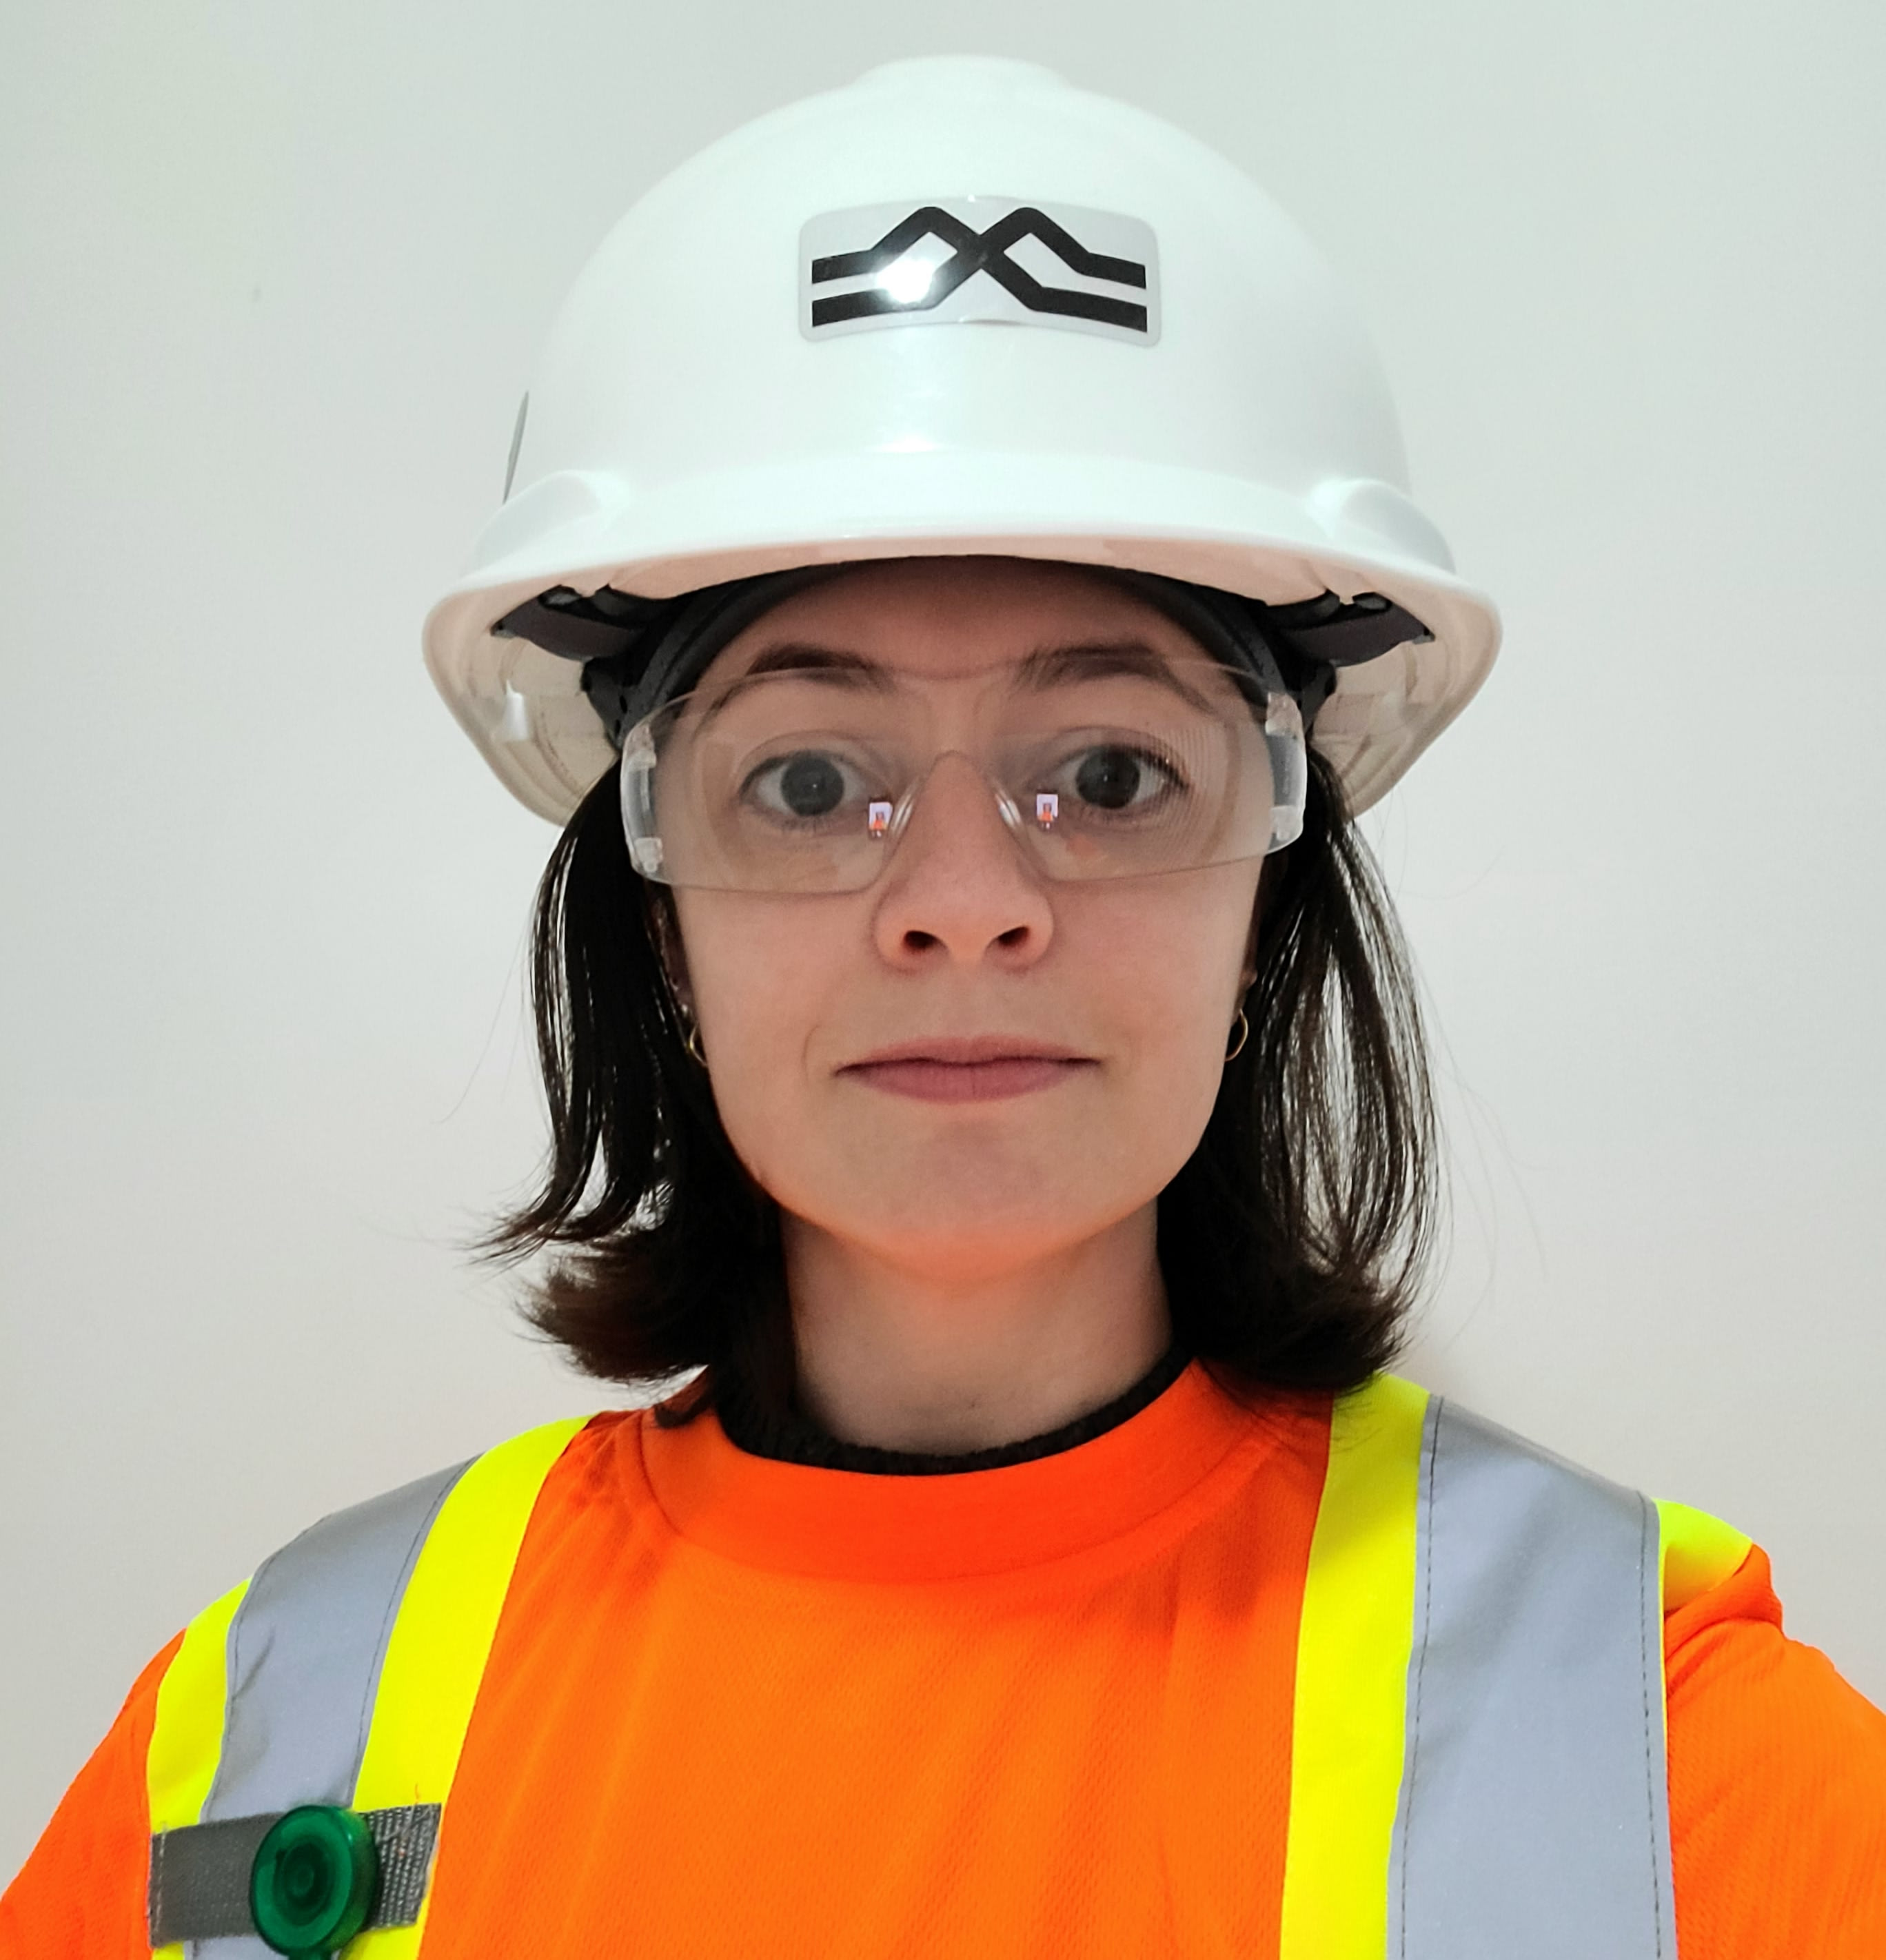 Metrolinx project coordinator Raquel Mendes Moreira pictured in full personal protective equipment.